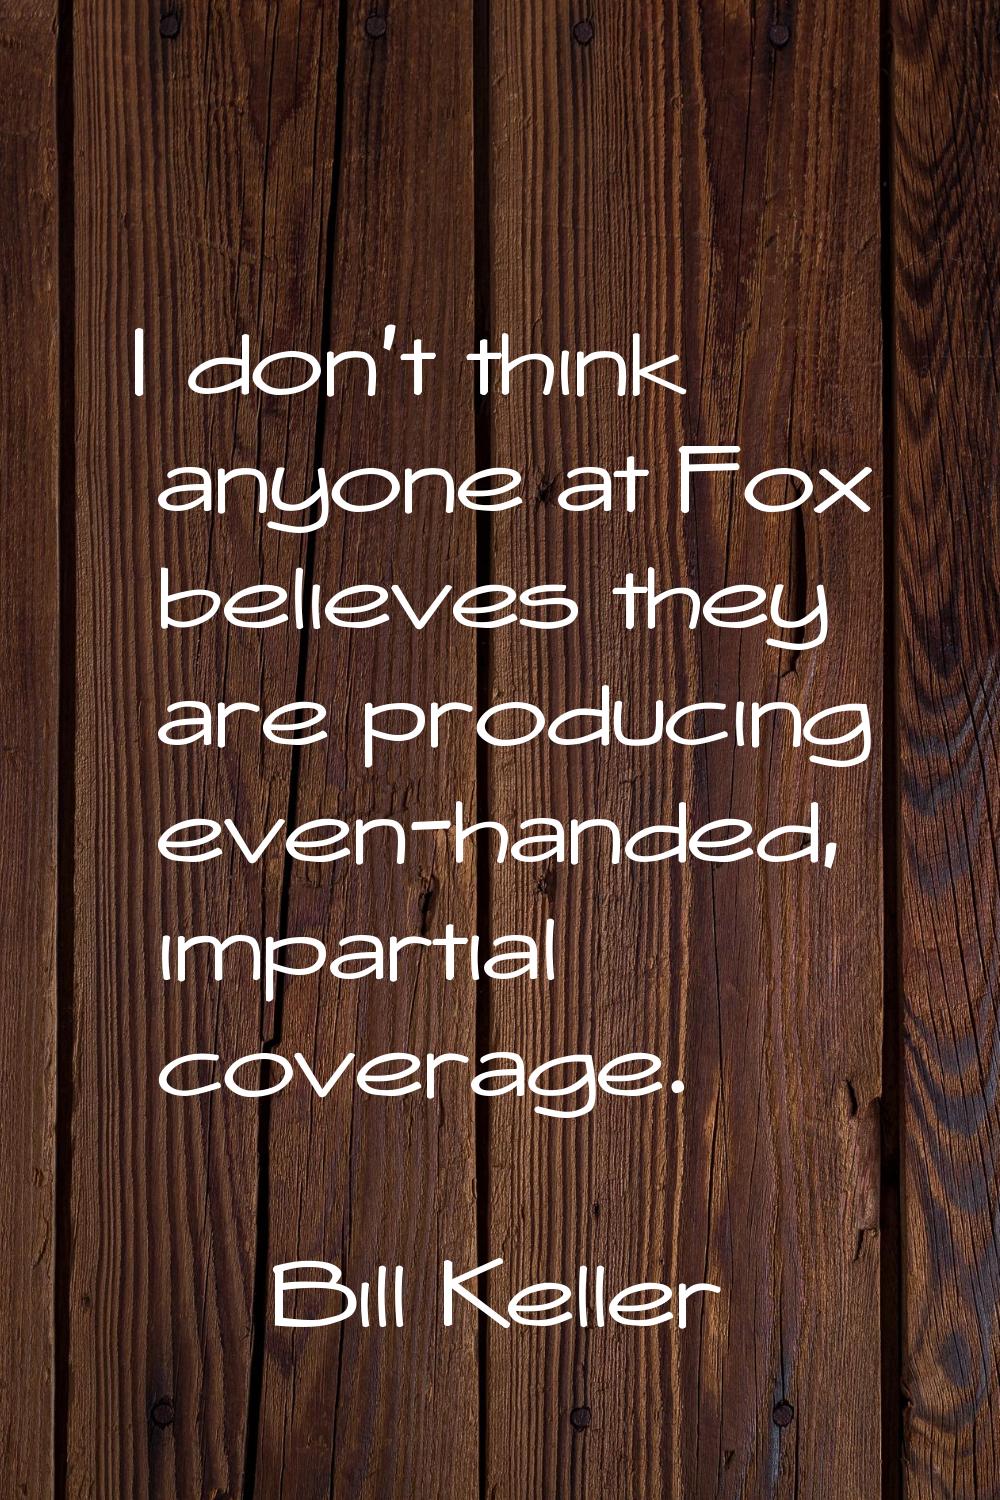 I don't think anyone at Fox believes they are producing even-handed, impartial coverage.